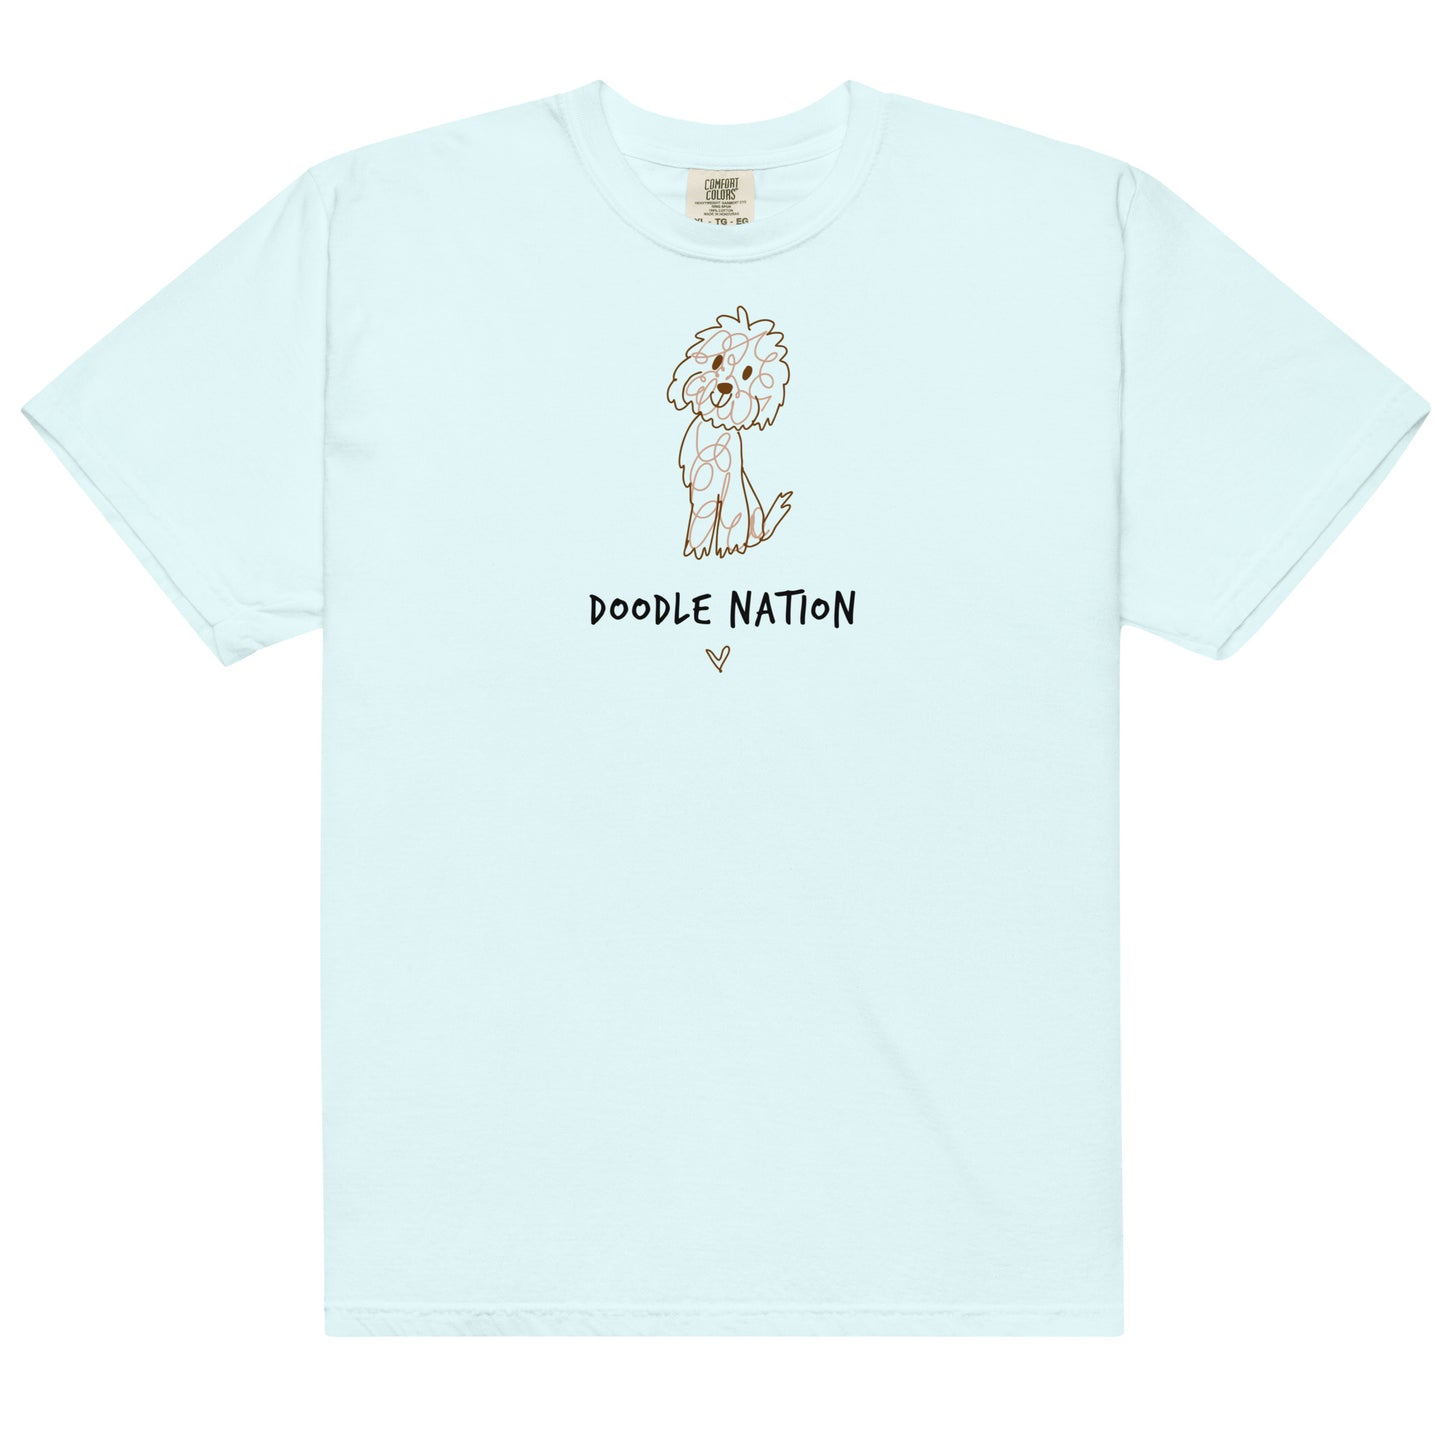 Chambray comfort color t-shirt with hand drawn dog design and saying Doodle Nation